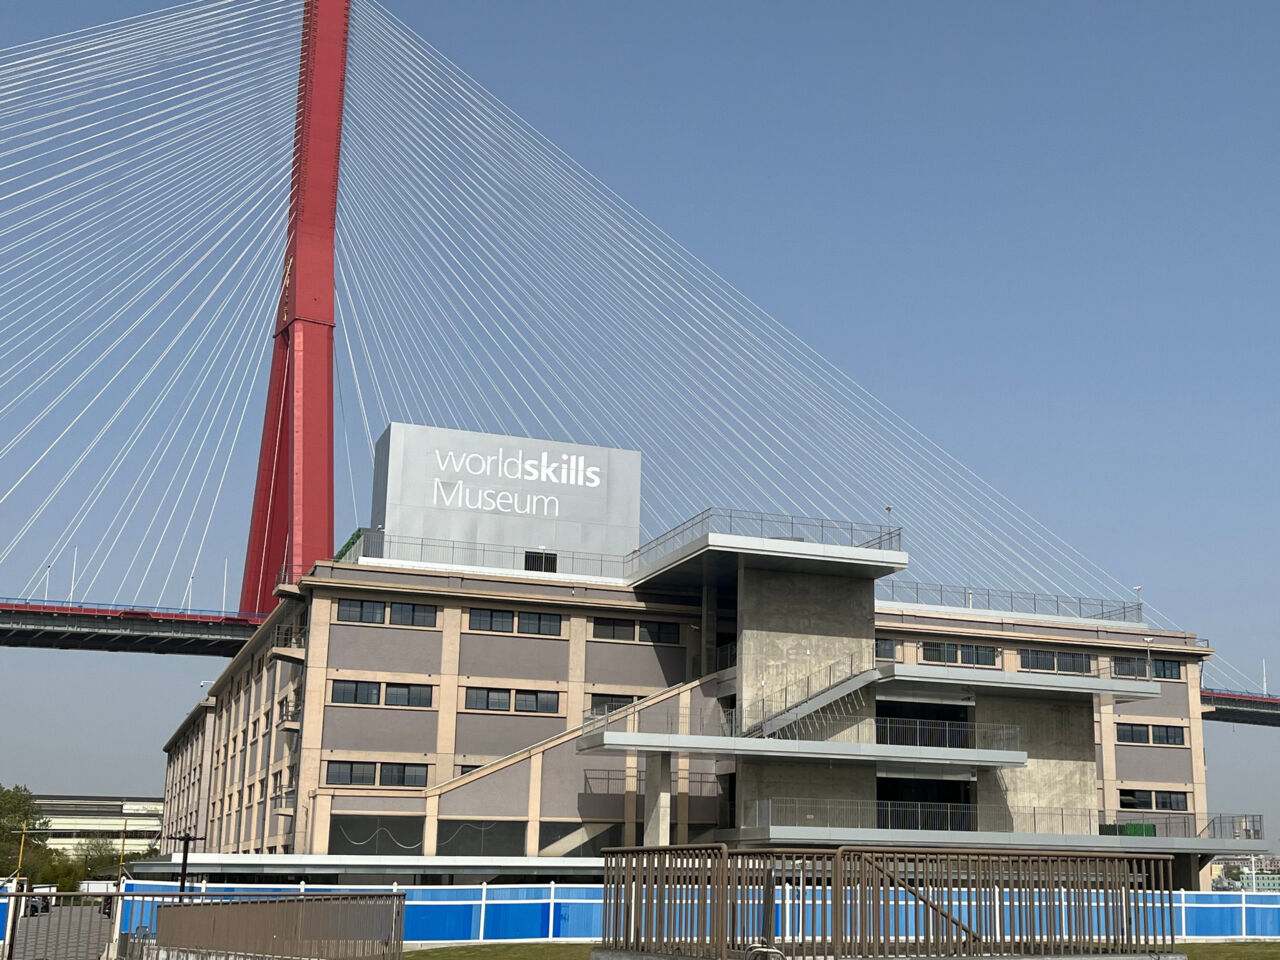 The WorldSkills Museum is in a 100-year-old former cotton warehouse in Shanghai’s historic YangPu district.